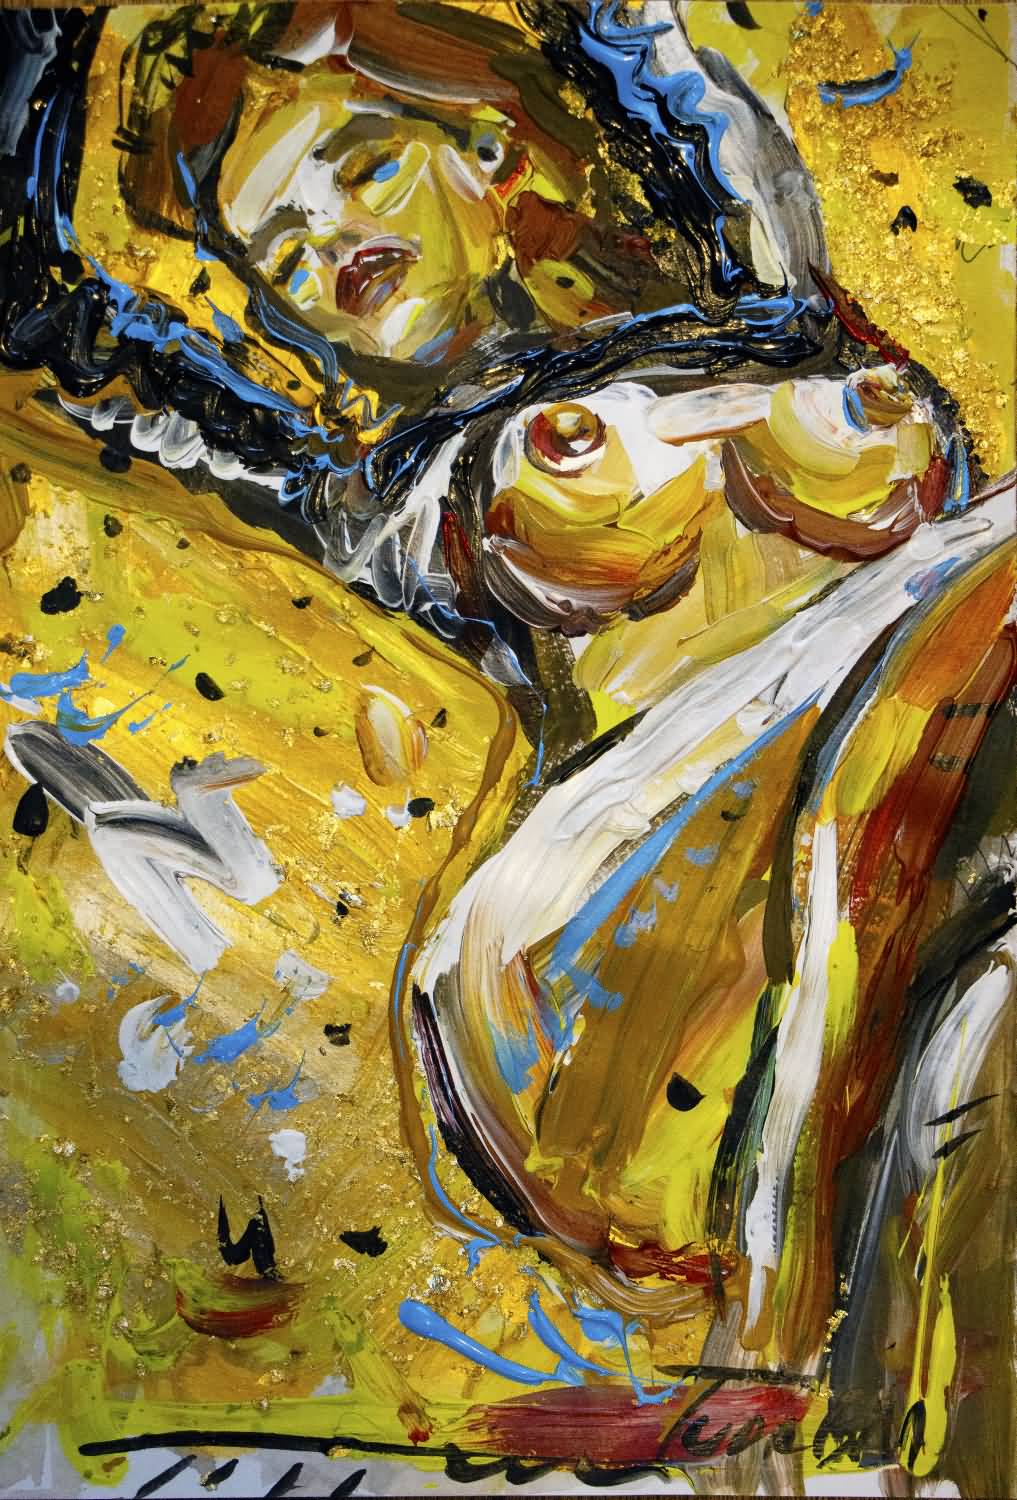 19. Yellow nude. Oil on canvas, 2021